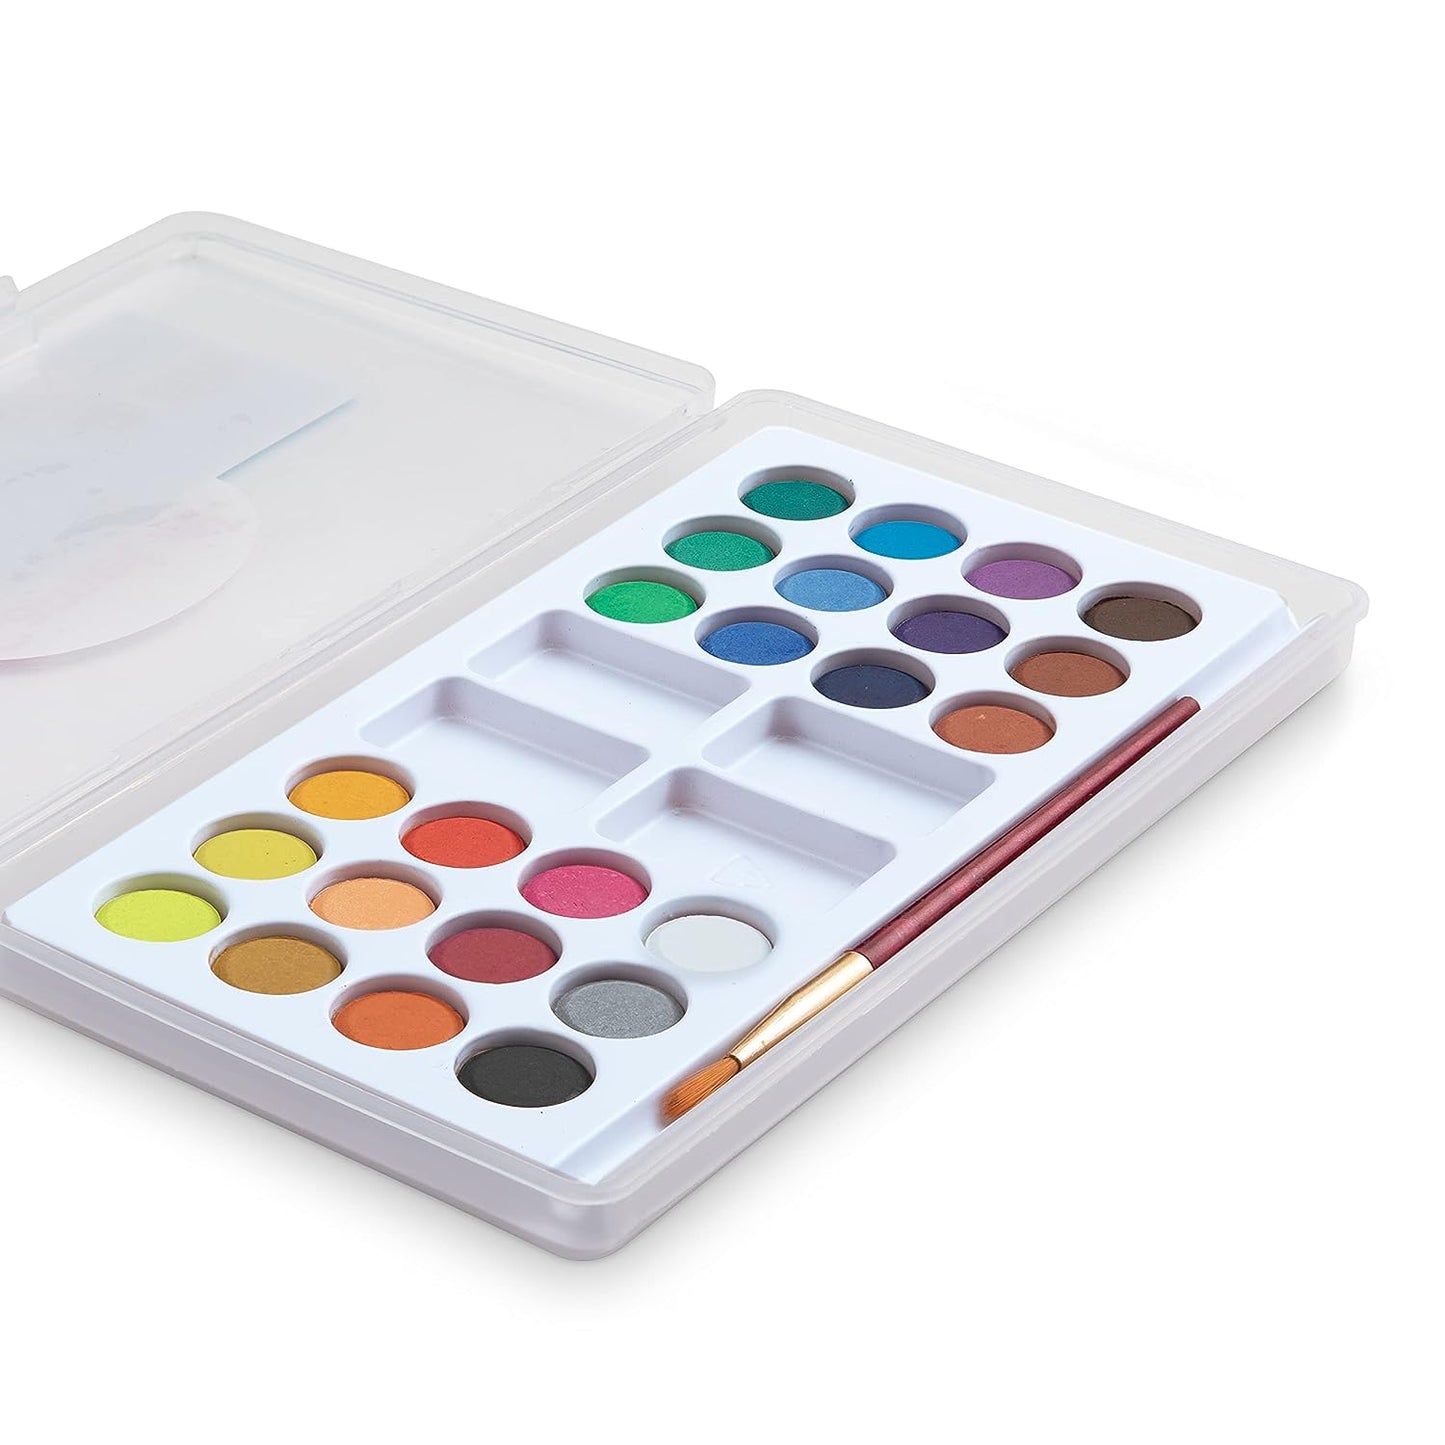 Camel Student Water Color Cakes - 24 Shades